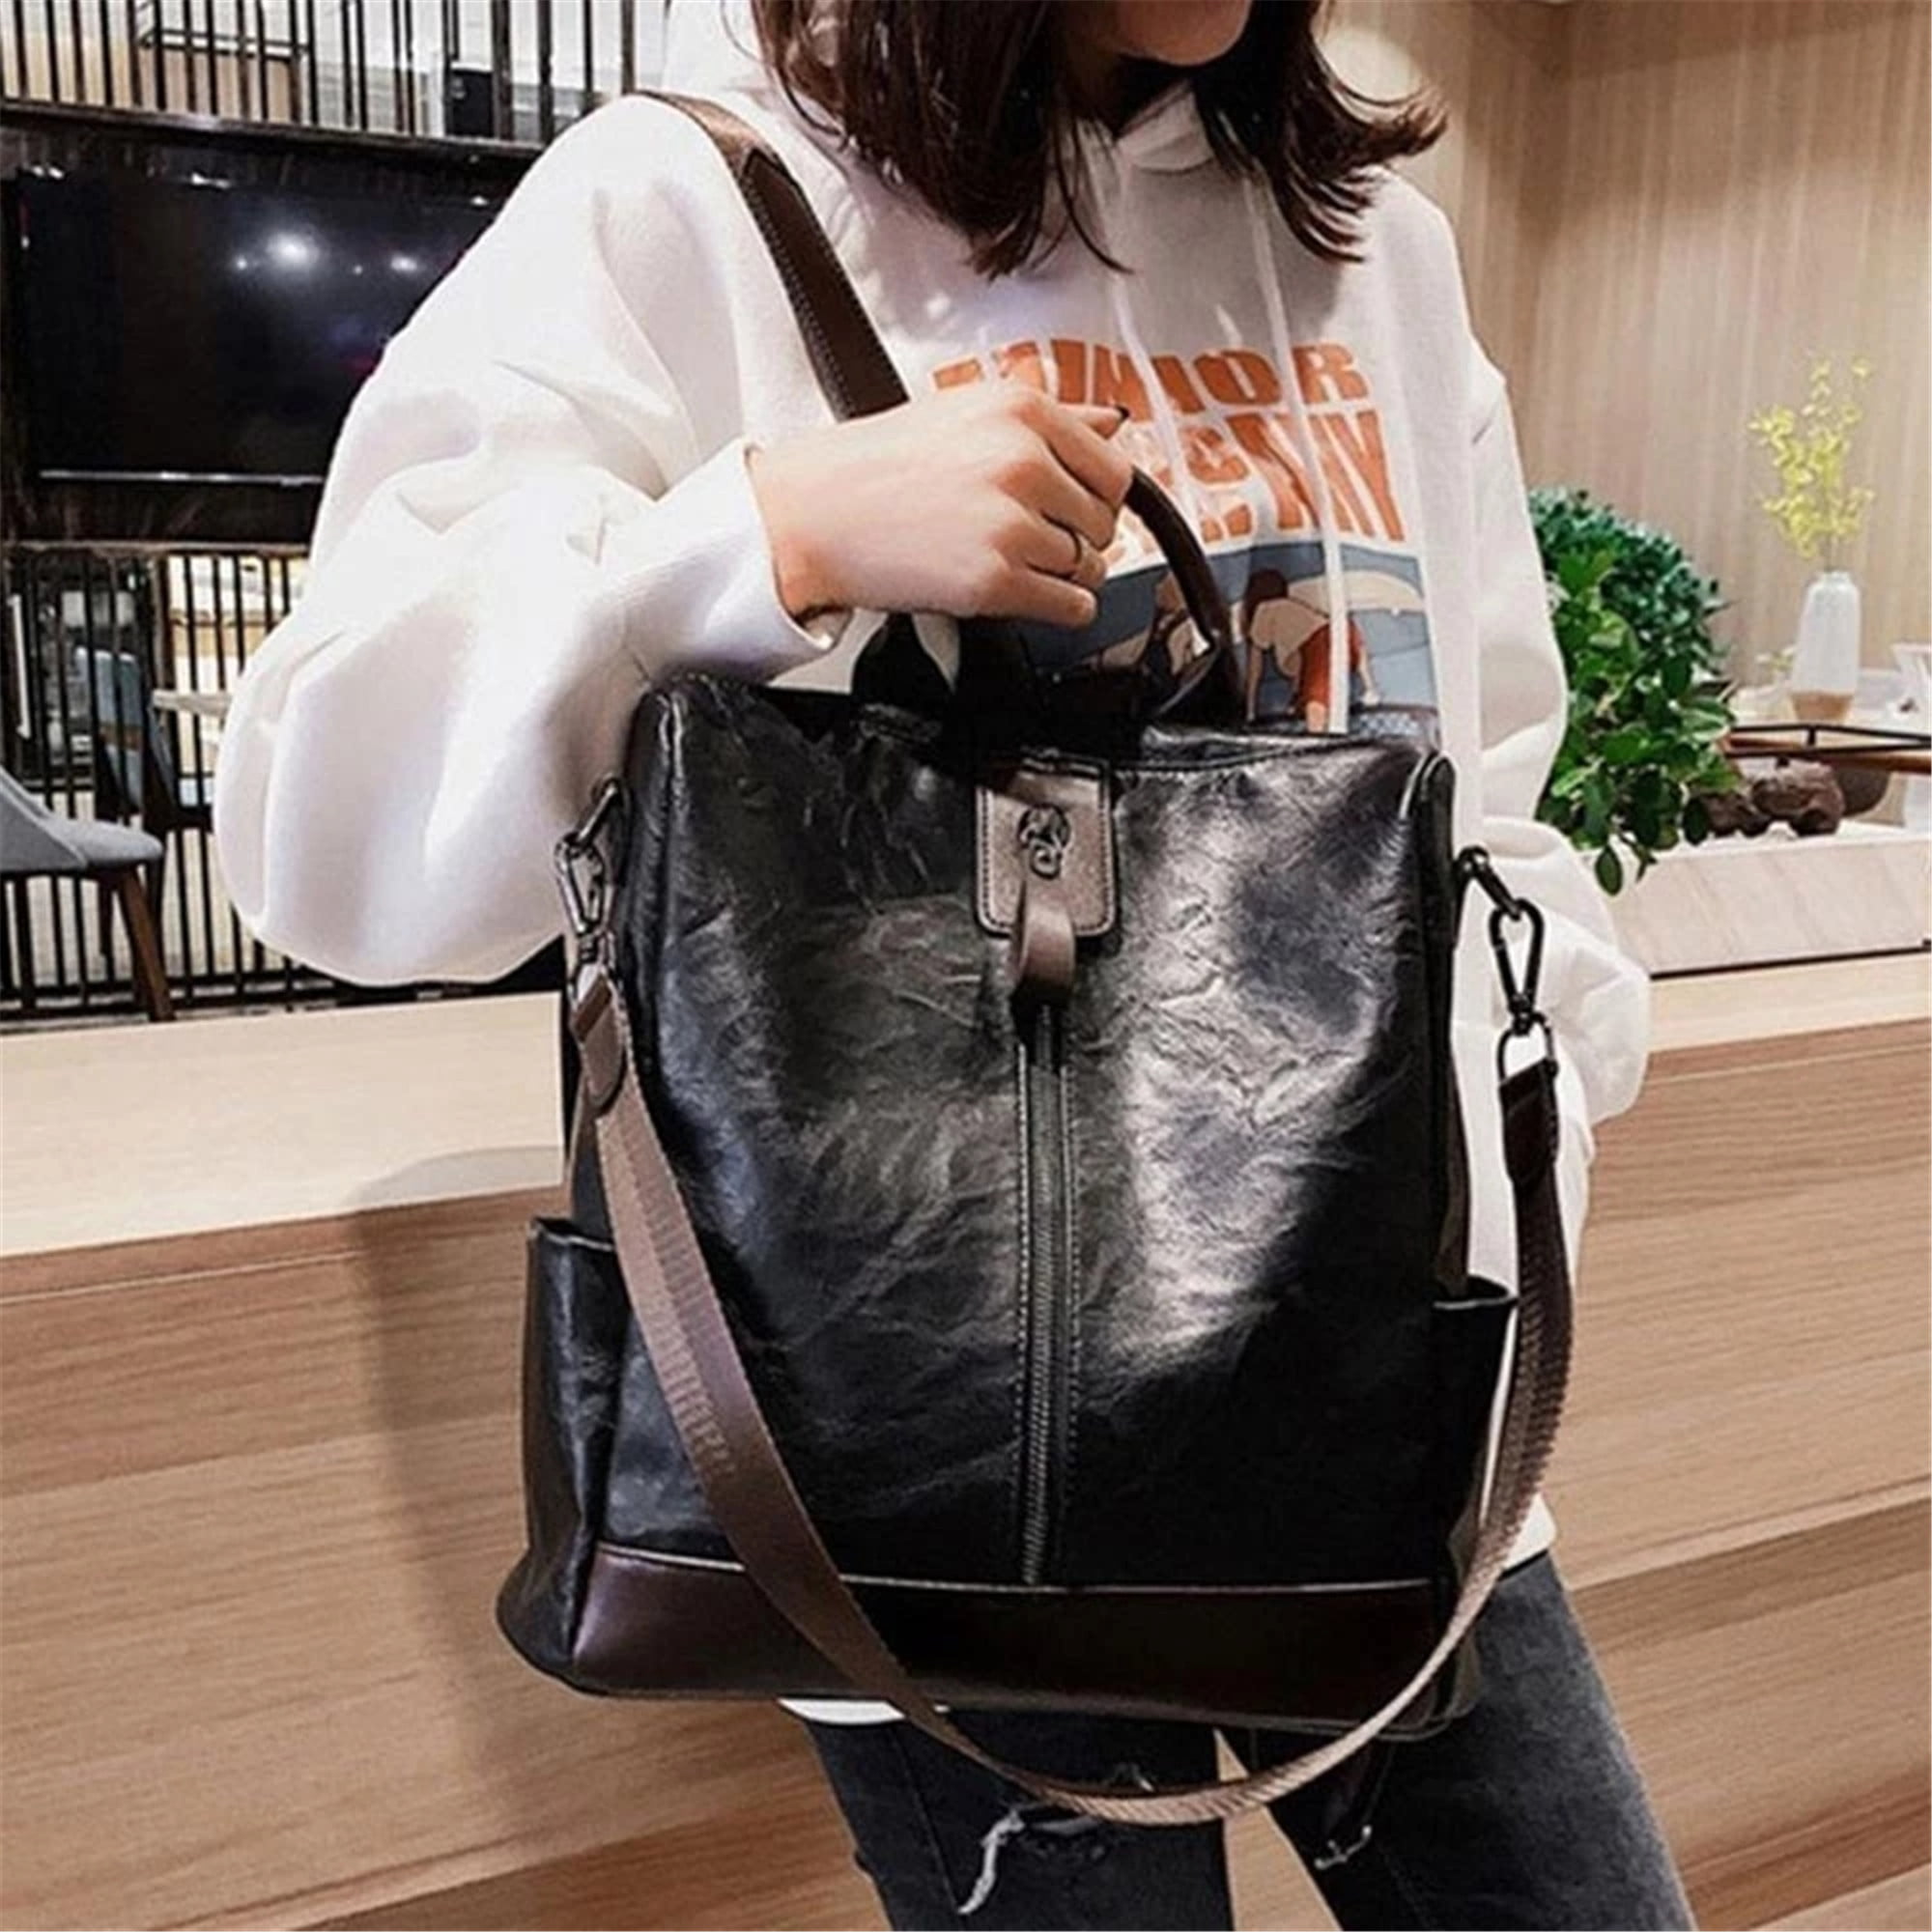 Sexy Dance 2Pcs Women School Backpack Purse Checkered Shoulder Handbag Chic Tote  Work Bag Anti-Theft Rucksack Daypack with Inner Pouch Wallet 